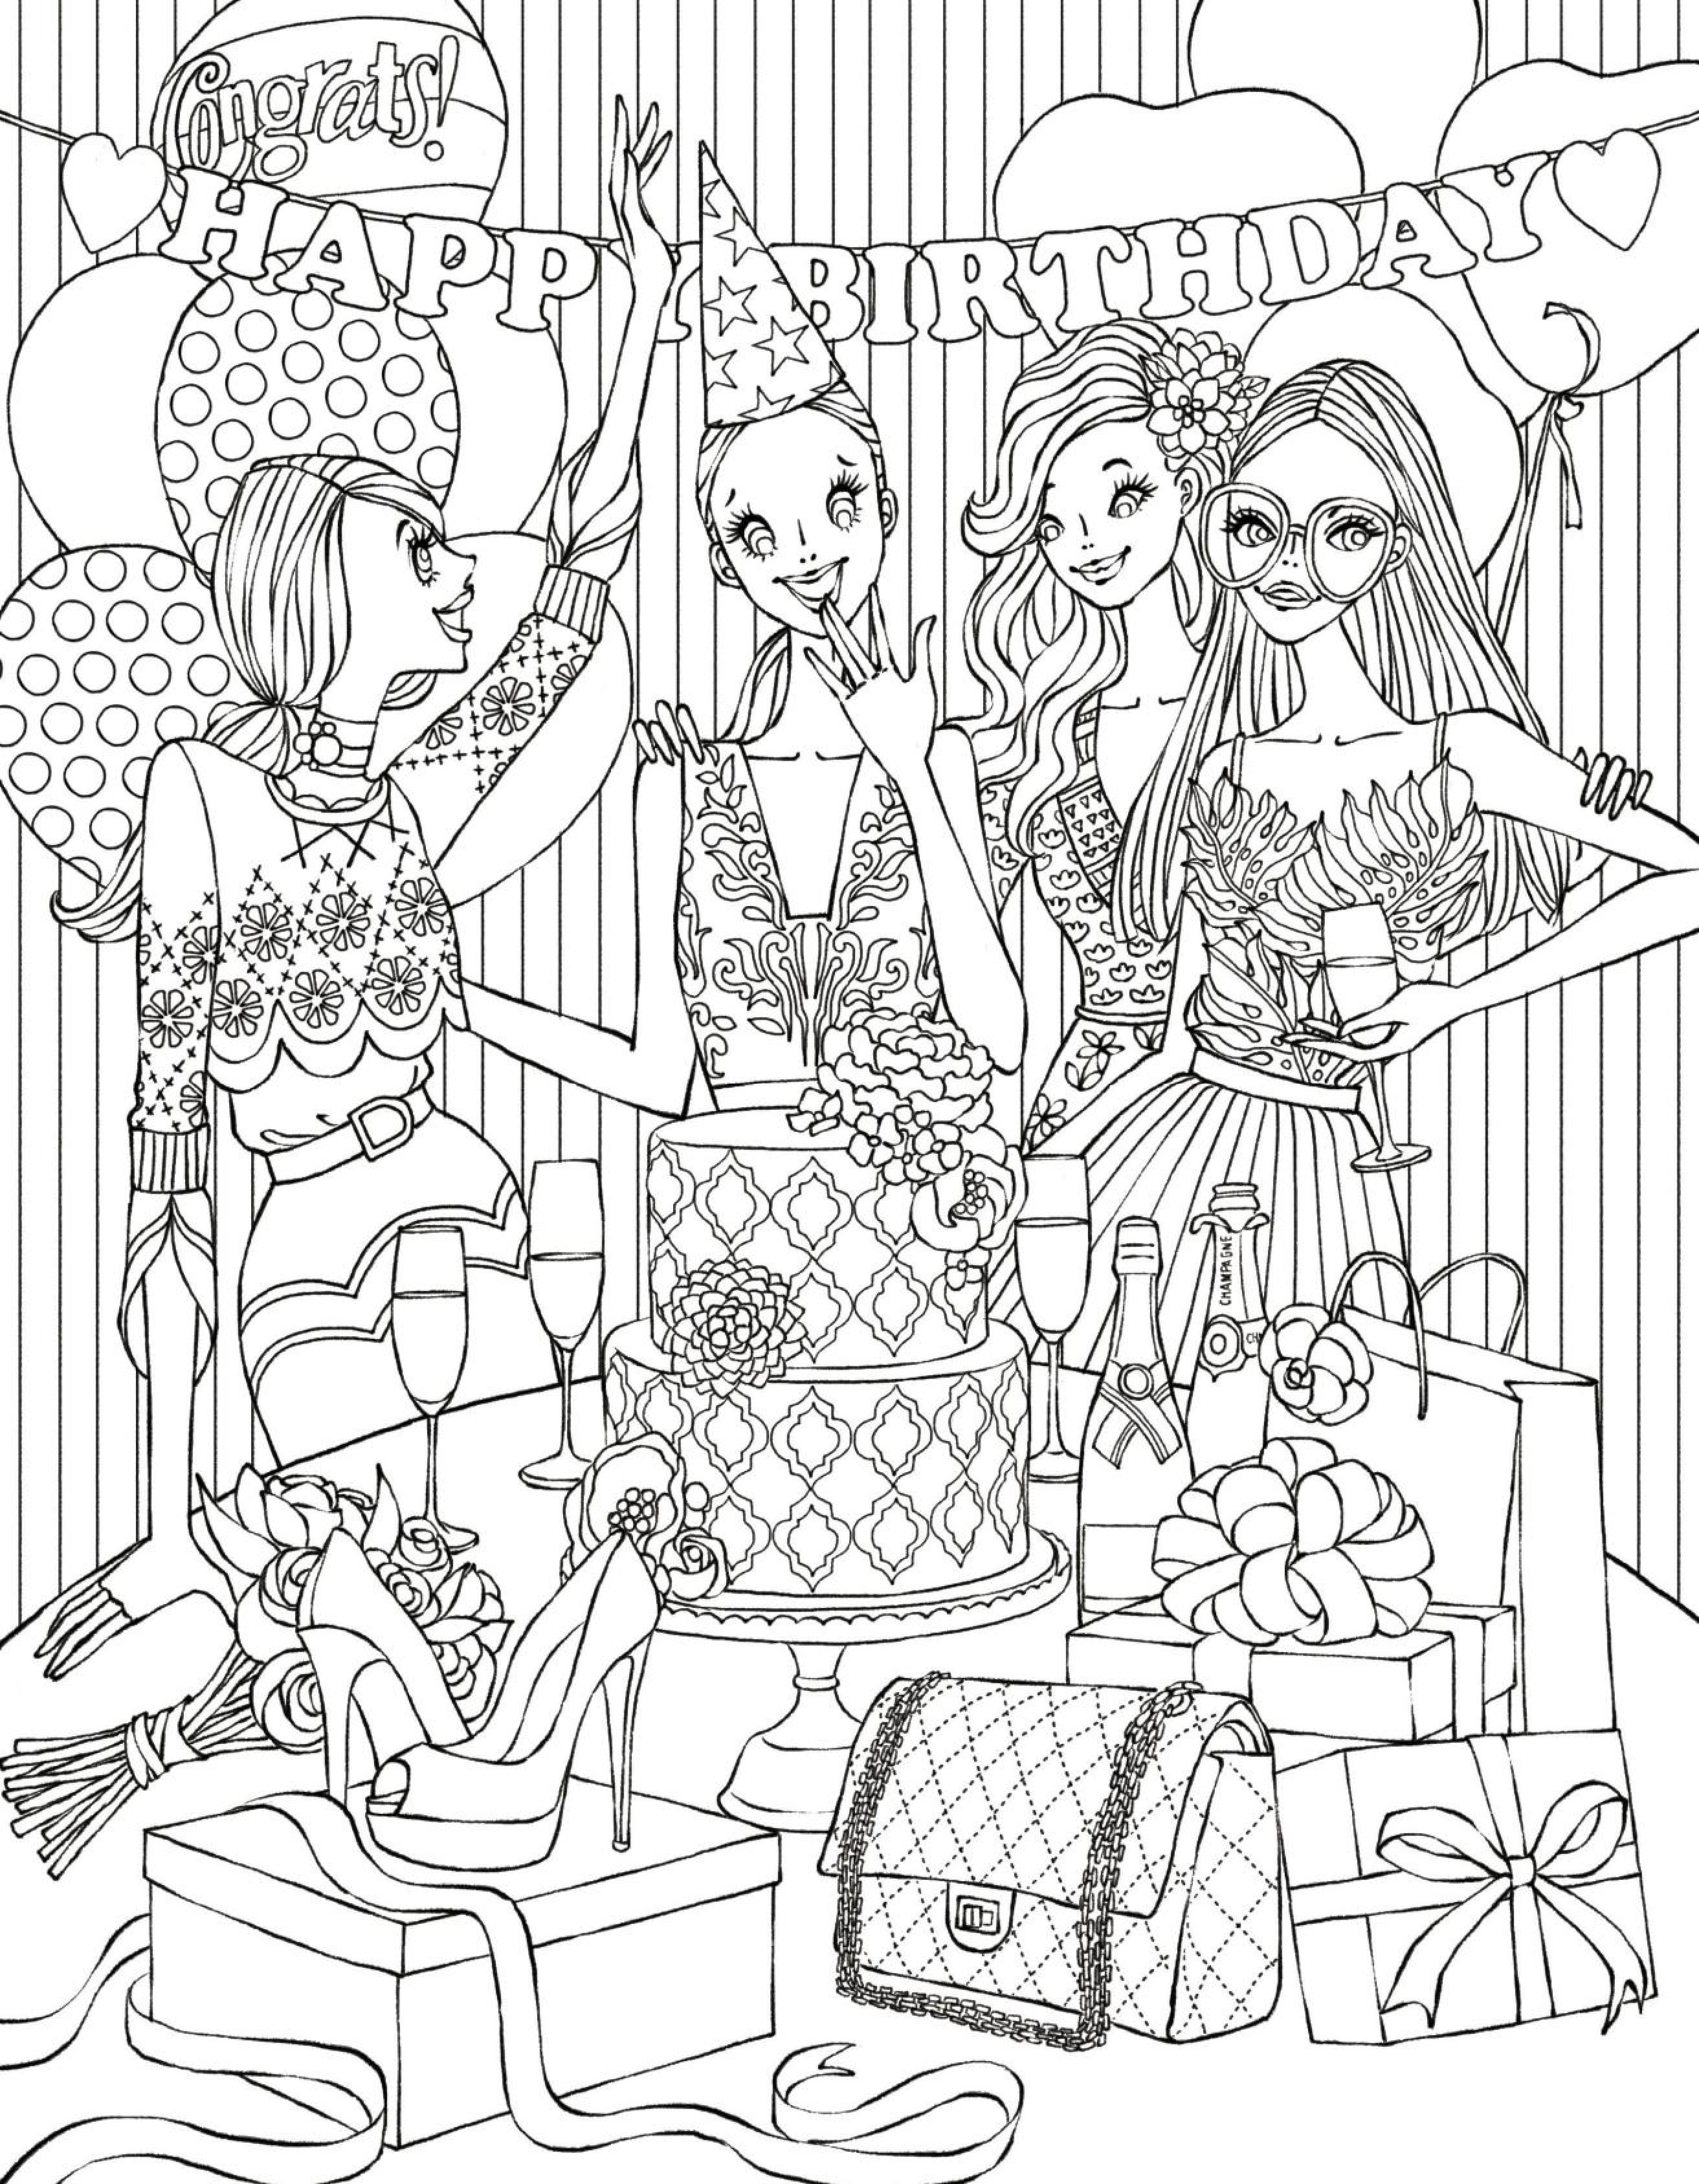 Parade Coloring Pages at GetDrawings | Free download